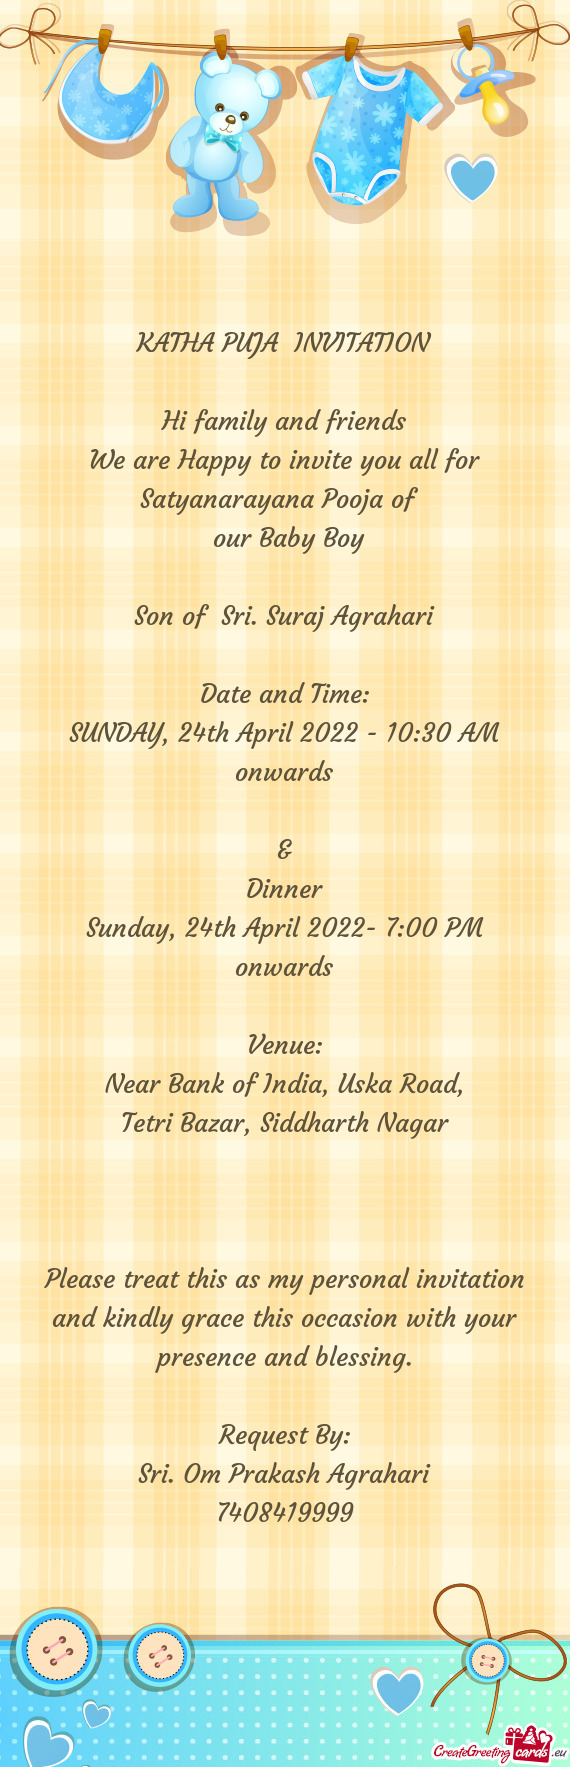 We are Happy to invite you all for Satyanarayana Pooja of